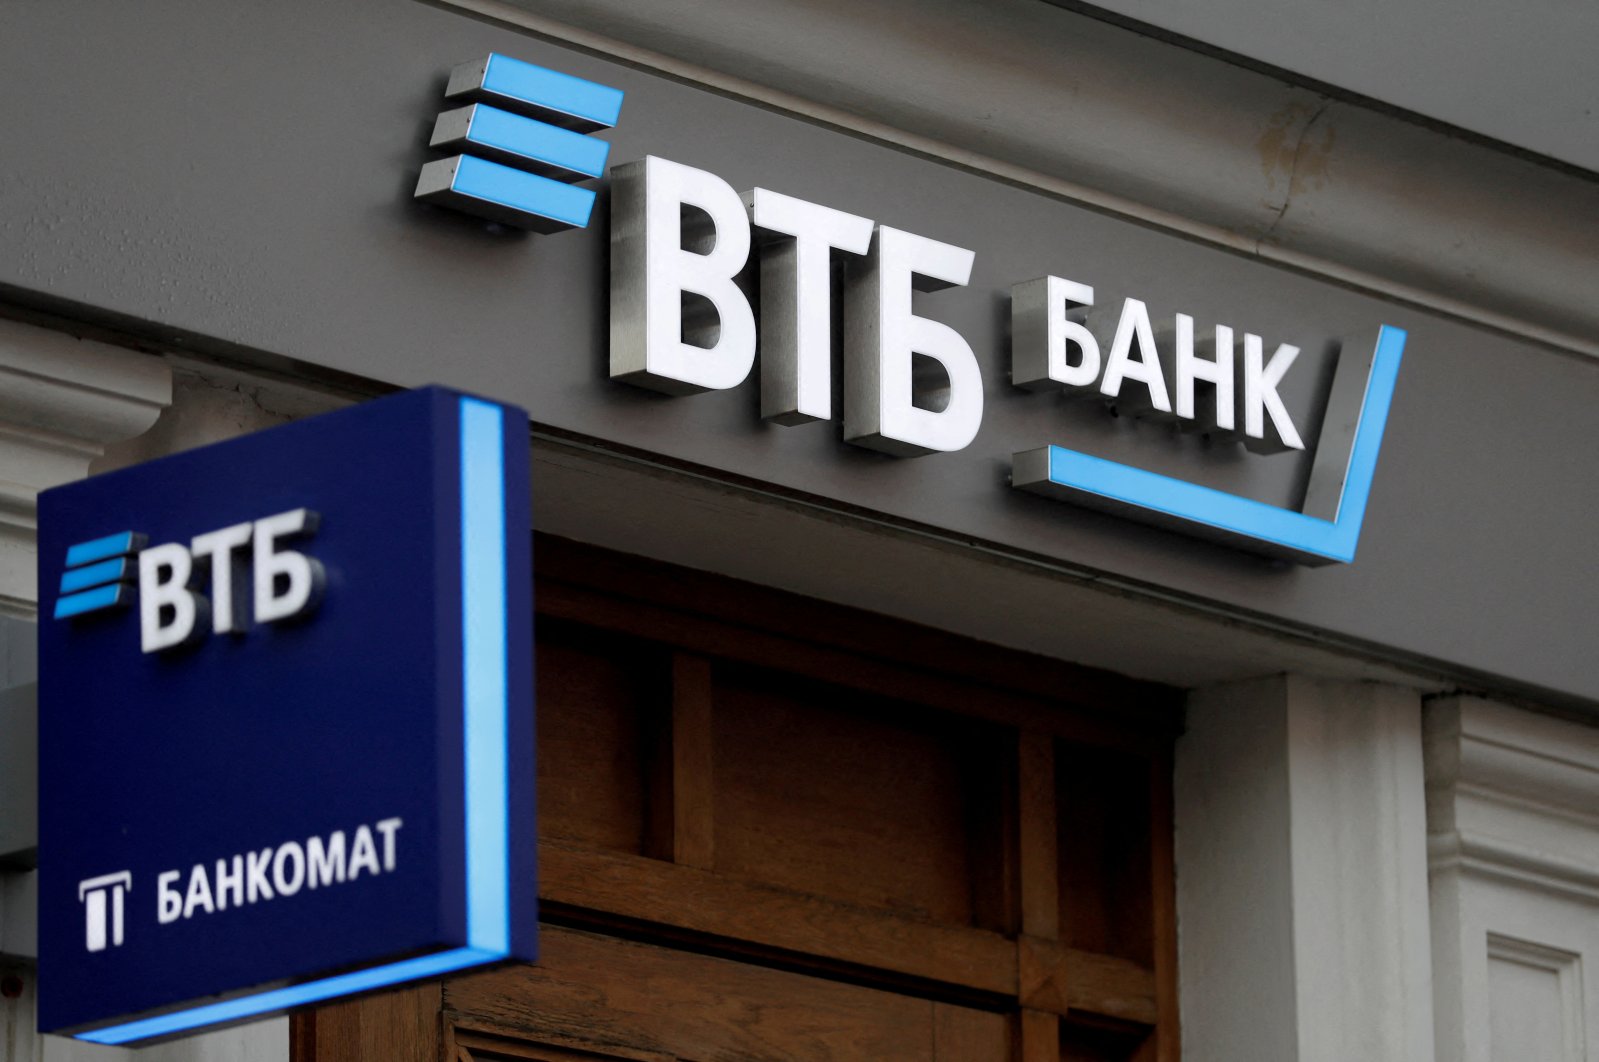 Logos are on display outside a branch of VTB Bank in Moscow, Russia May 30, 2019. (Reuters Photo)